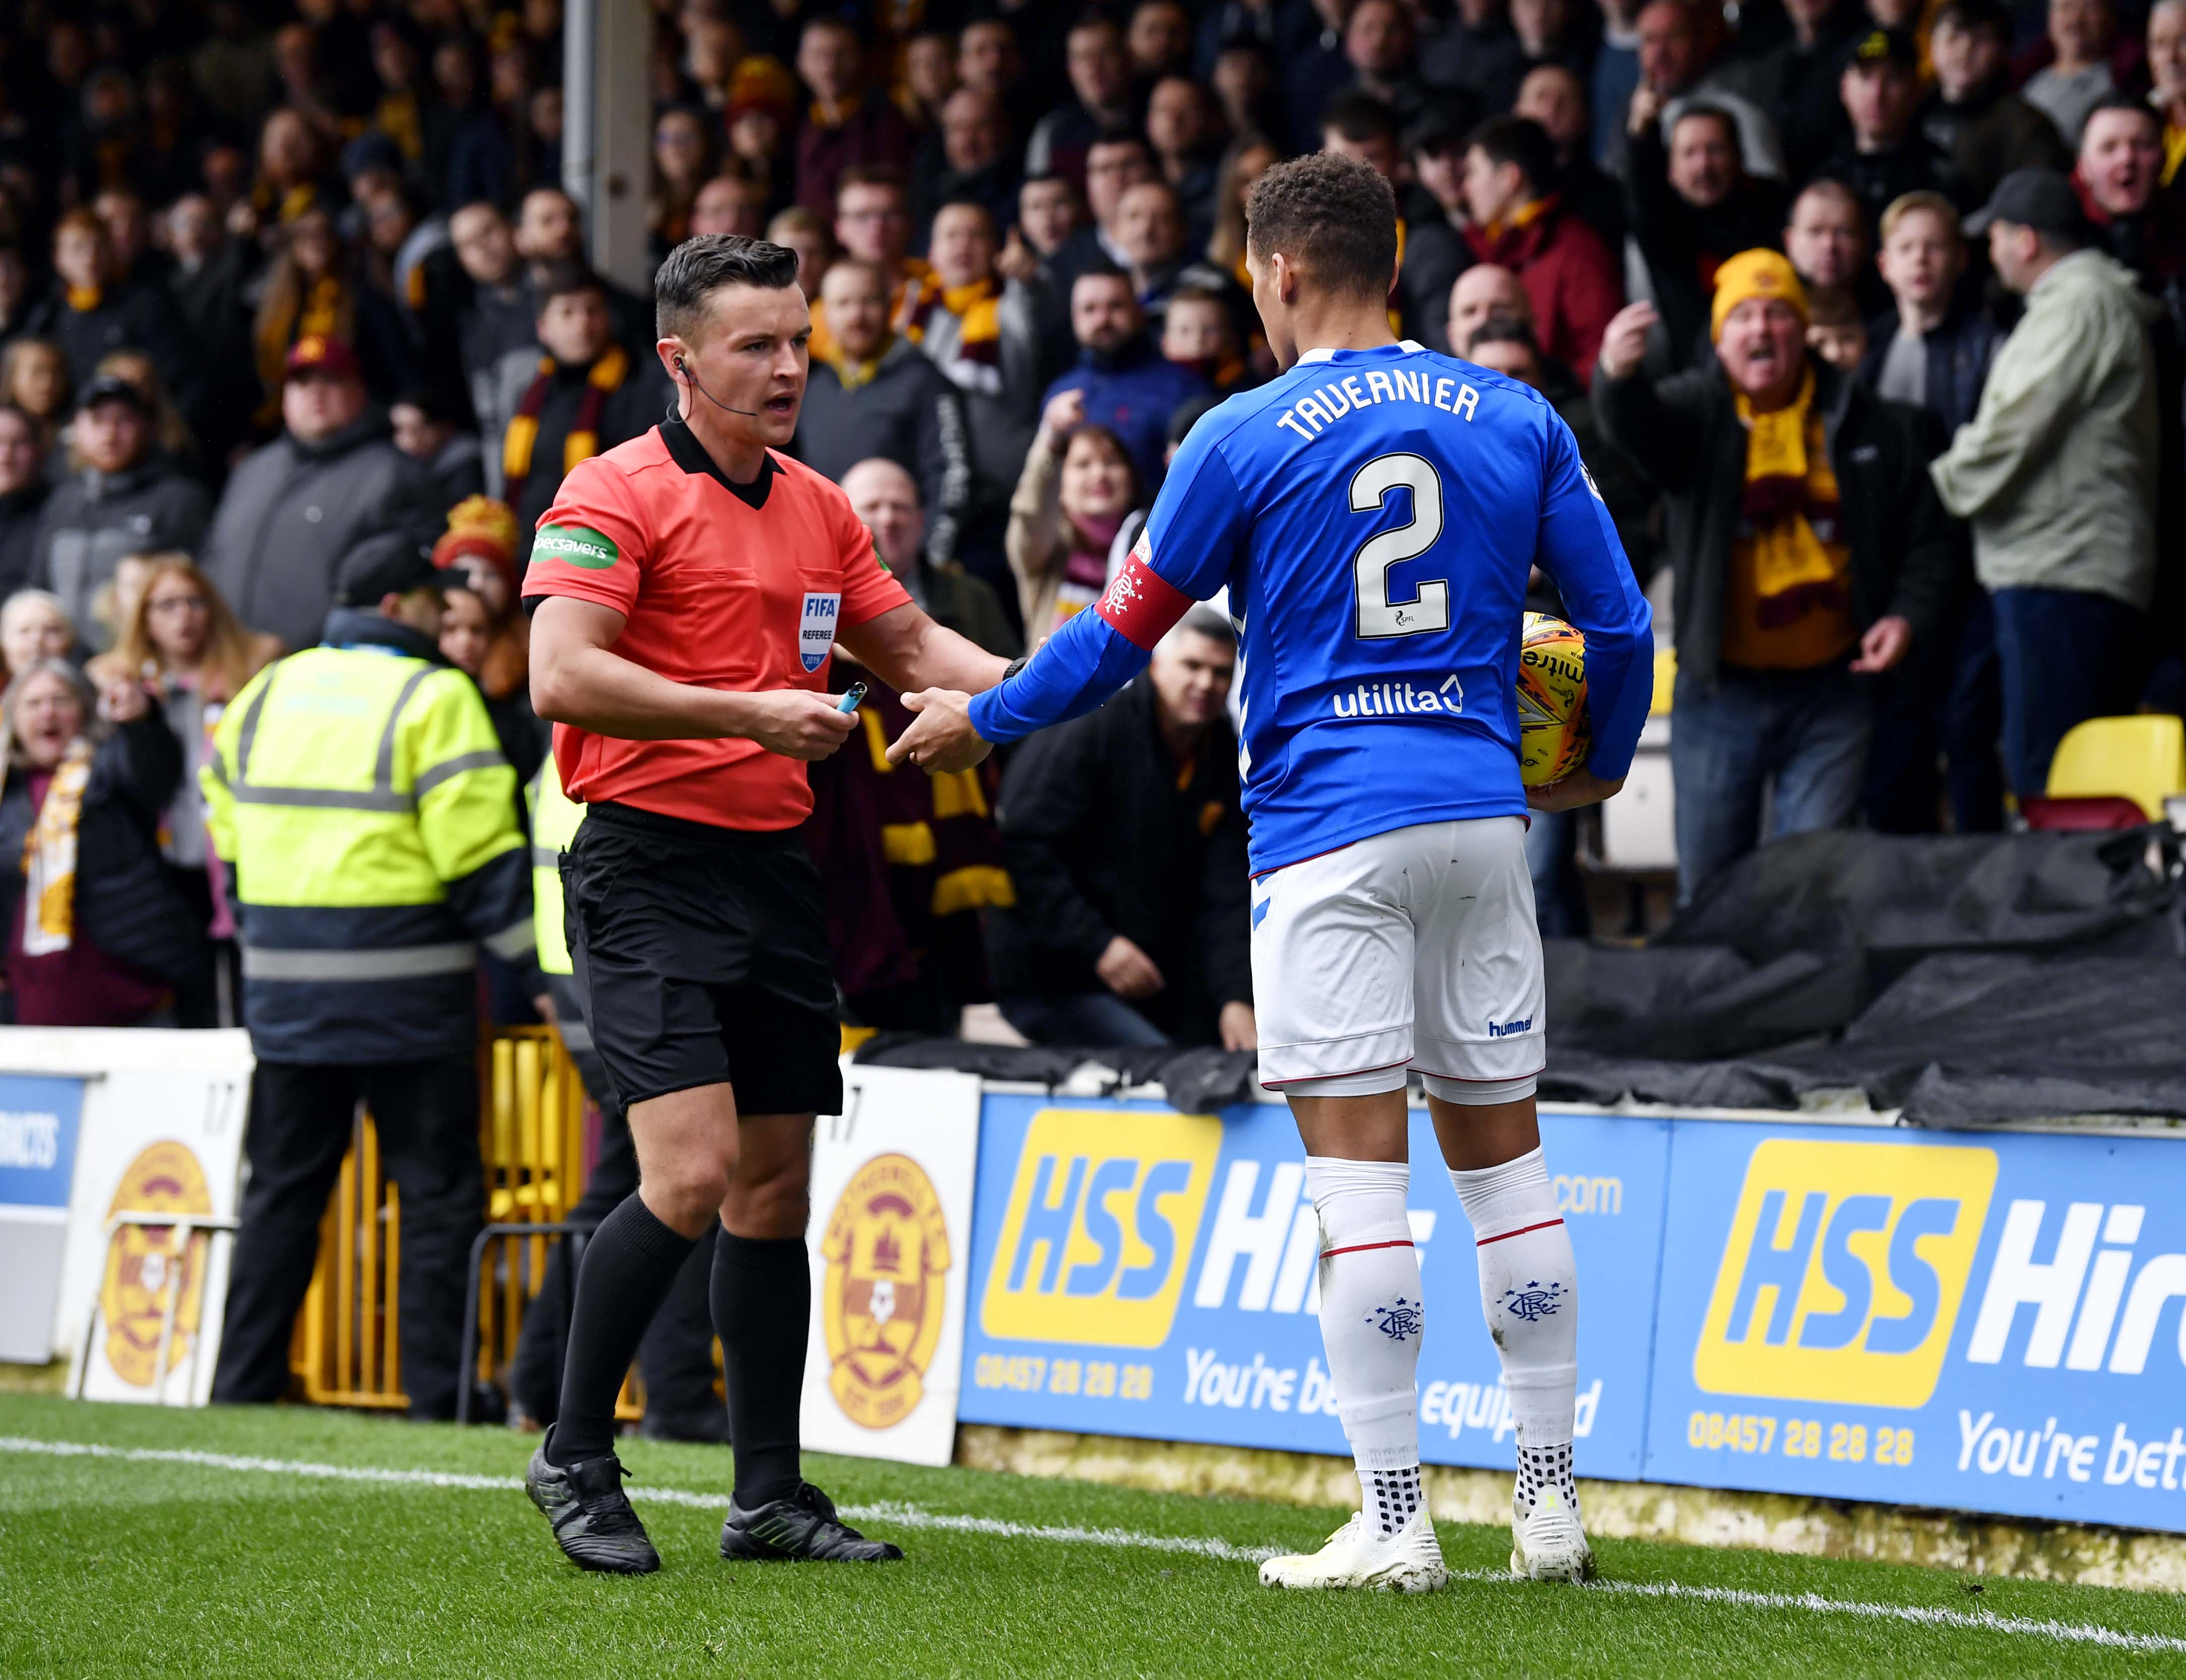 Rangers' James Tavernier spots an object thrown from the Motherwell fans as he goes to take a throw in and hands it to referee Nick Walsh